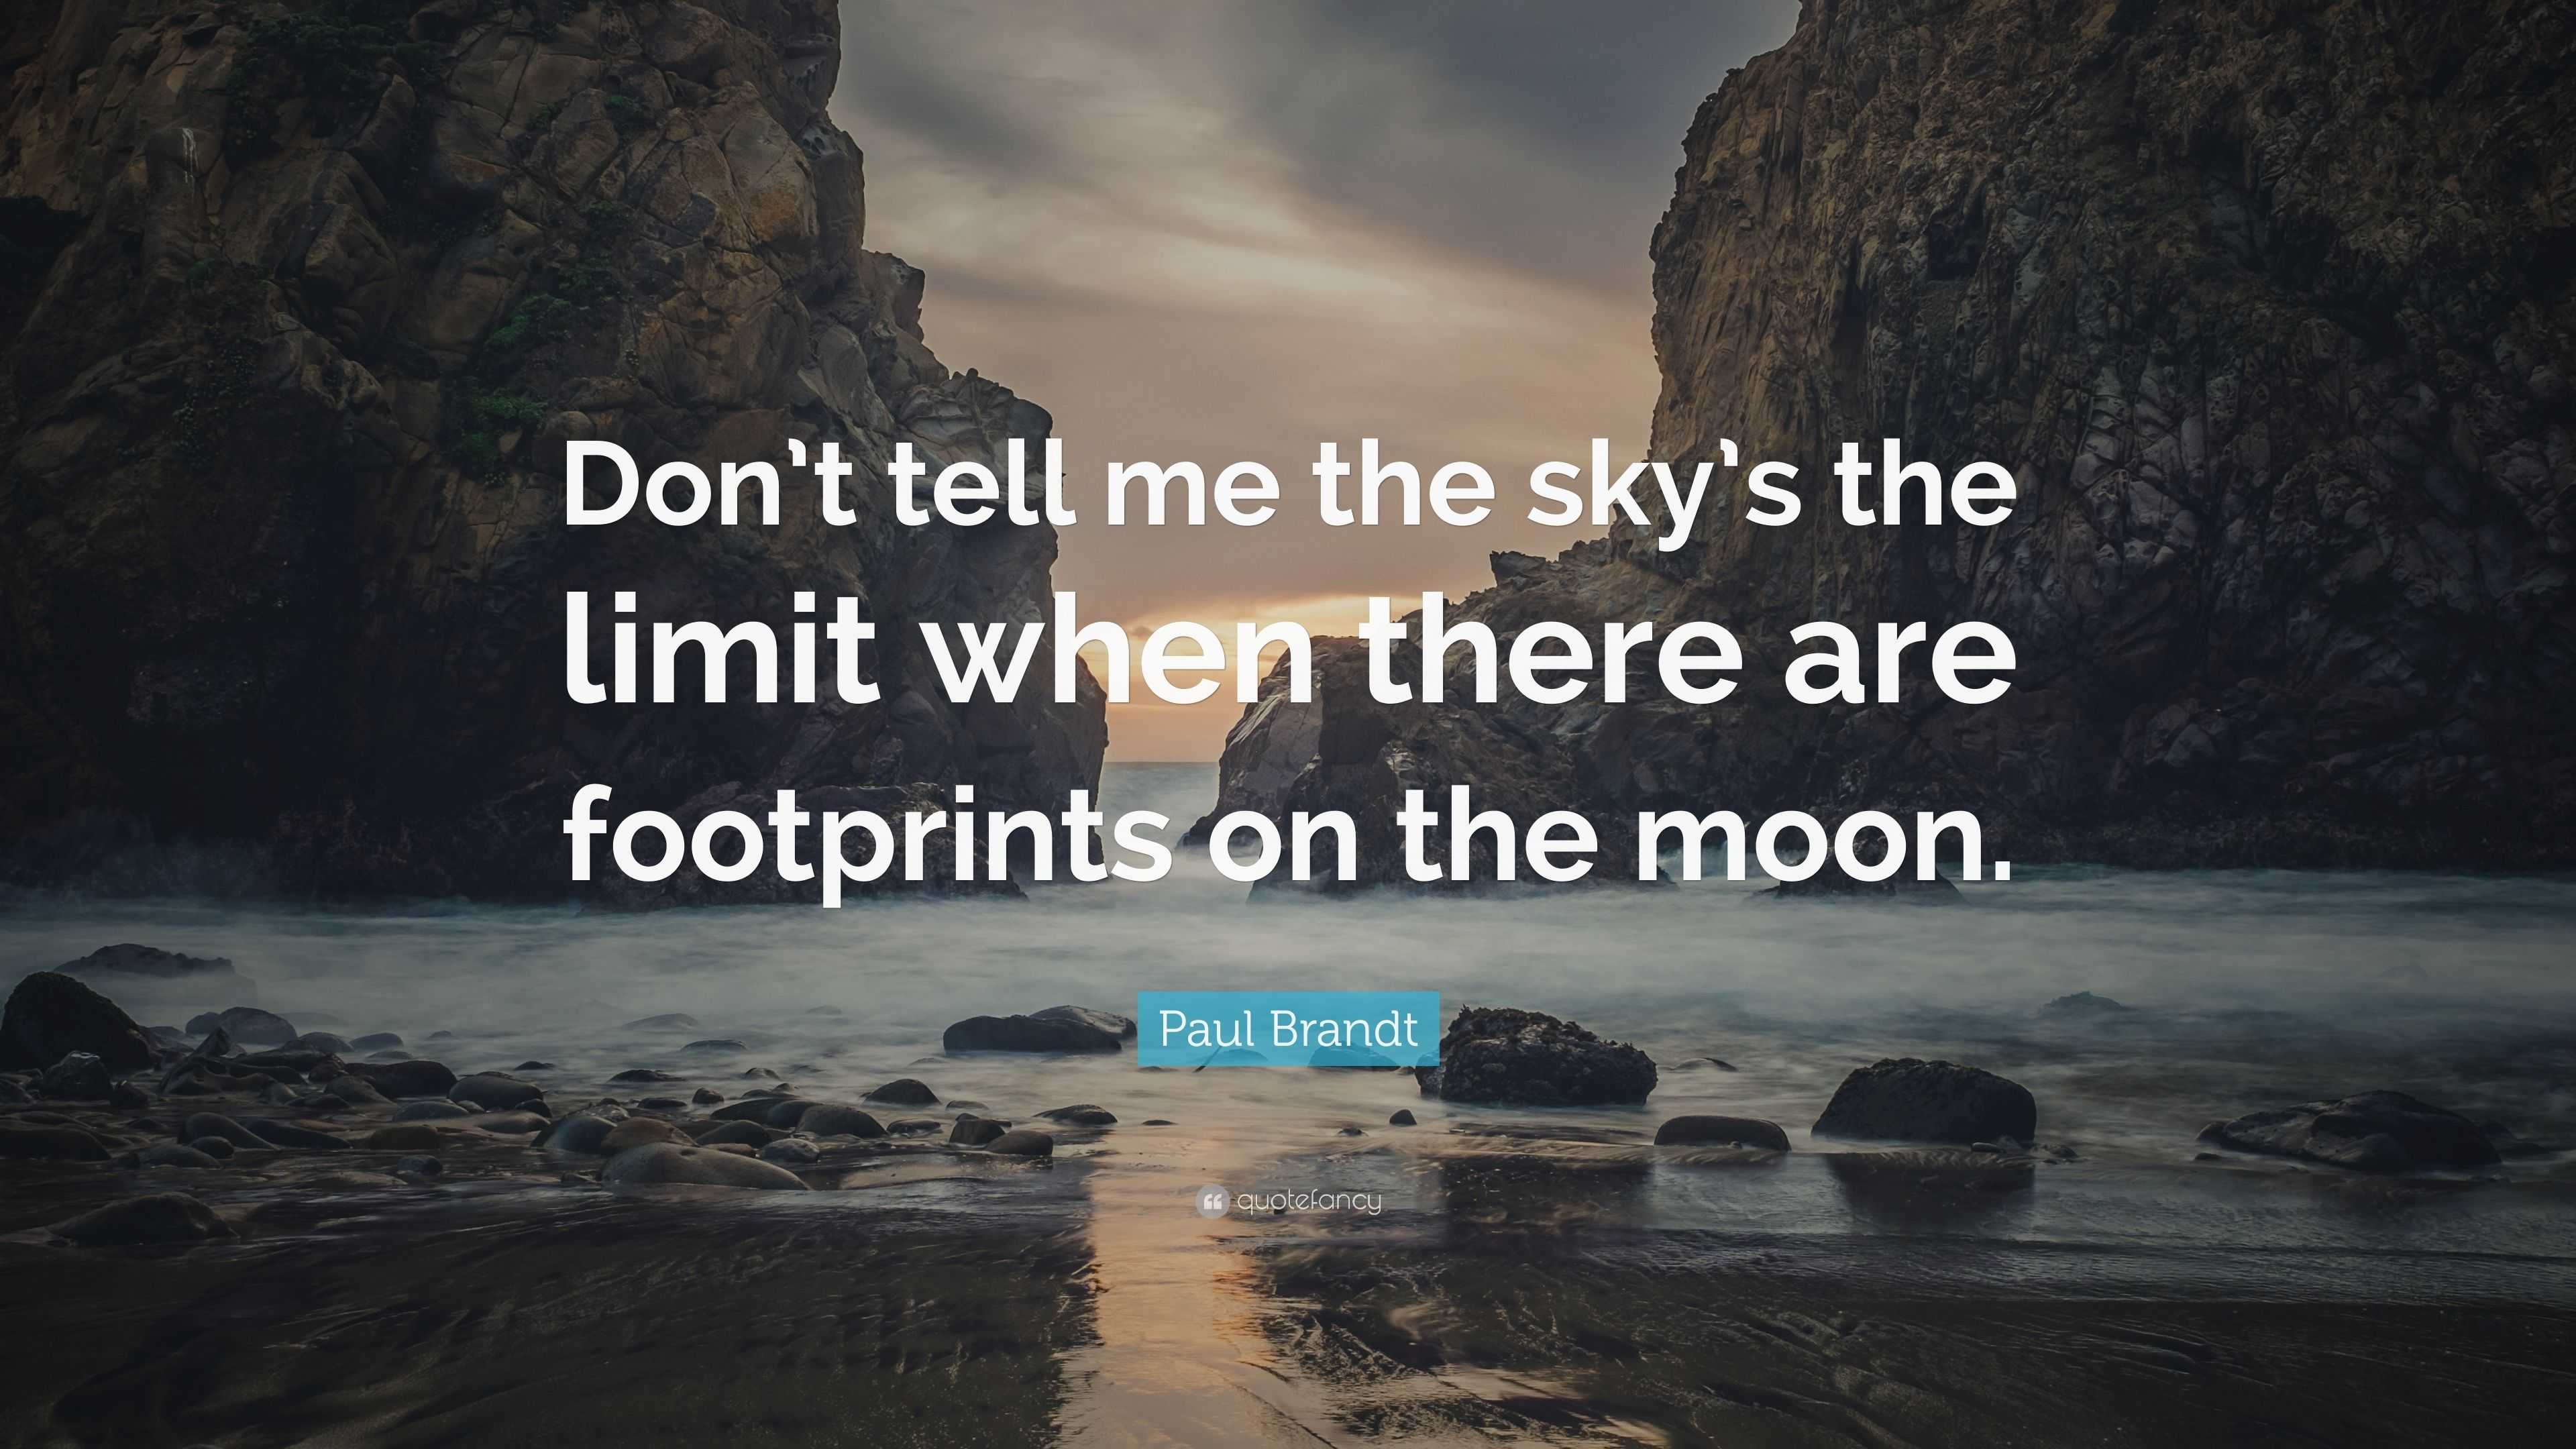 4679536 Paul Brandt Quote Don t tell me the sky s the limit when there are